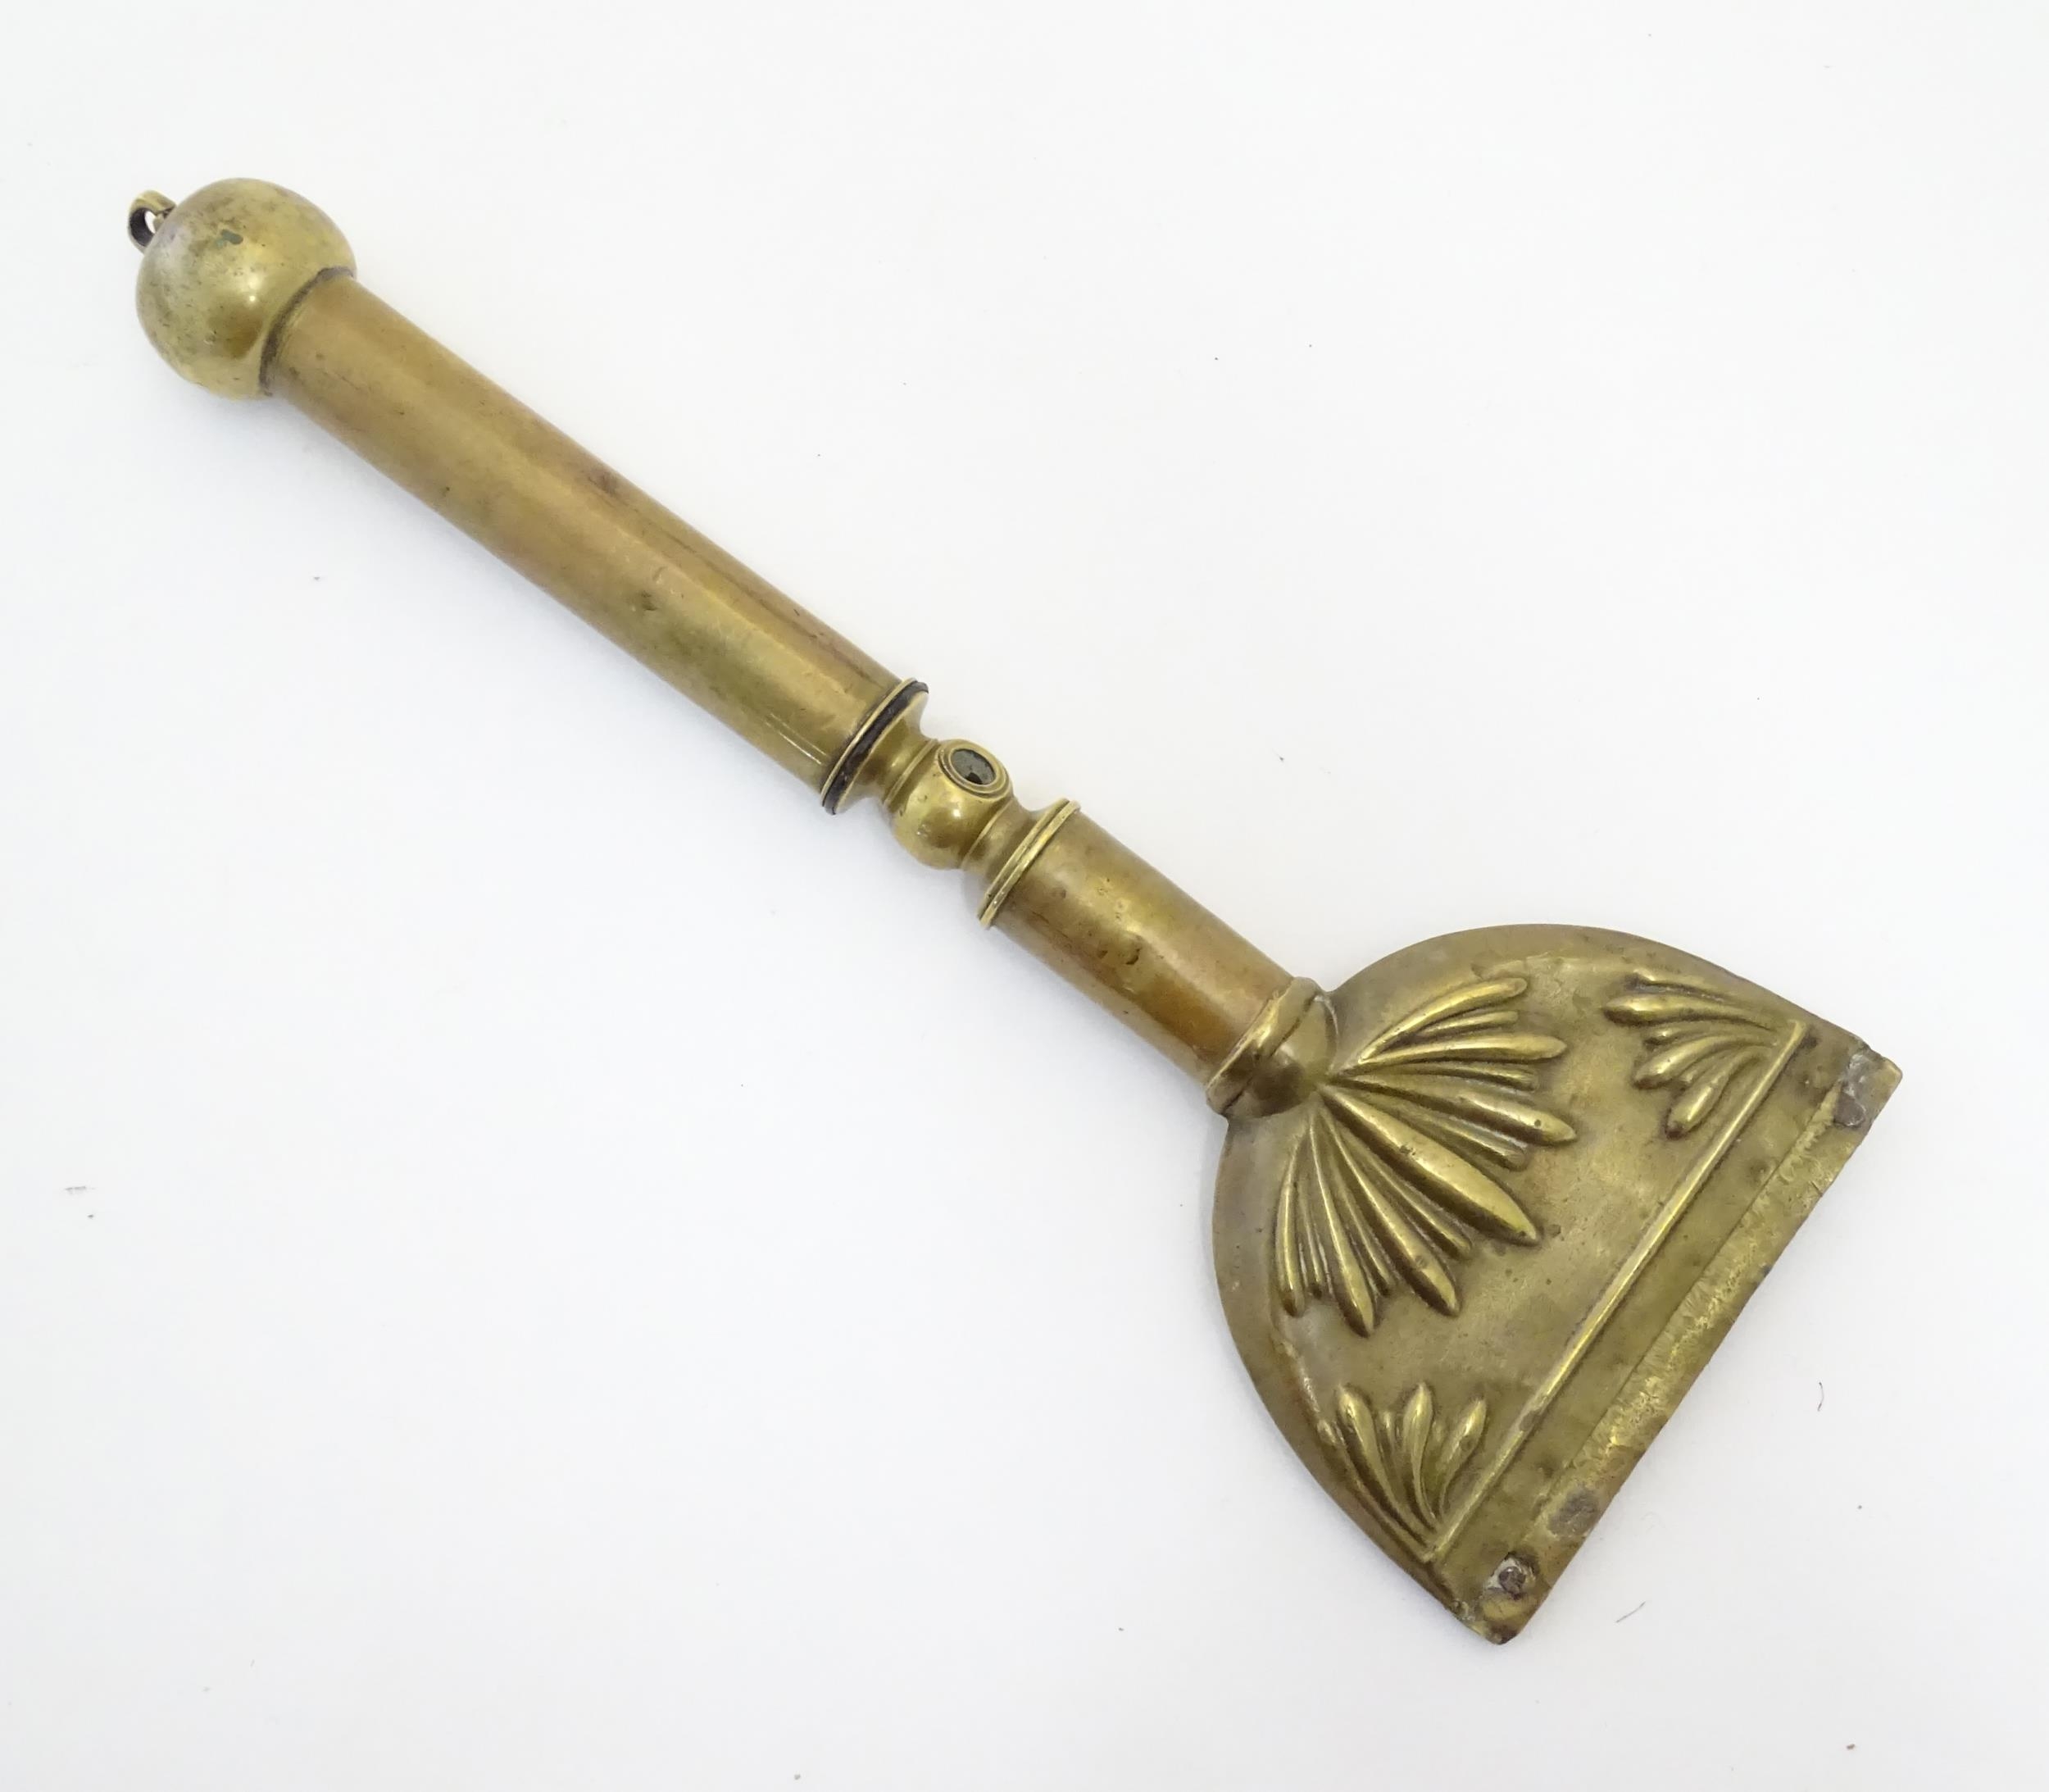 A 19thC brass horse hair singer / singeing lamp with embossed shell detail. Approx. 13 3/4" long - Image 3 of 6